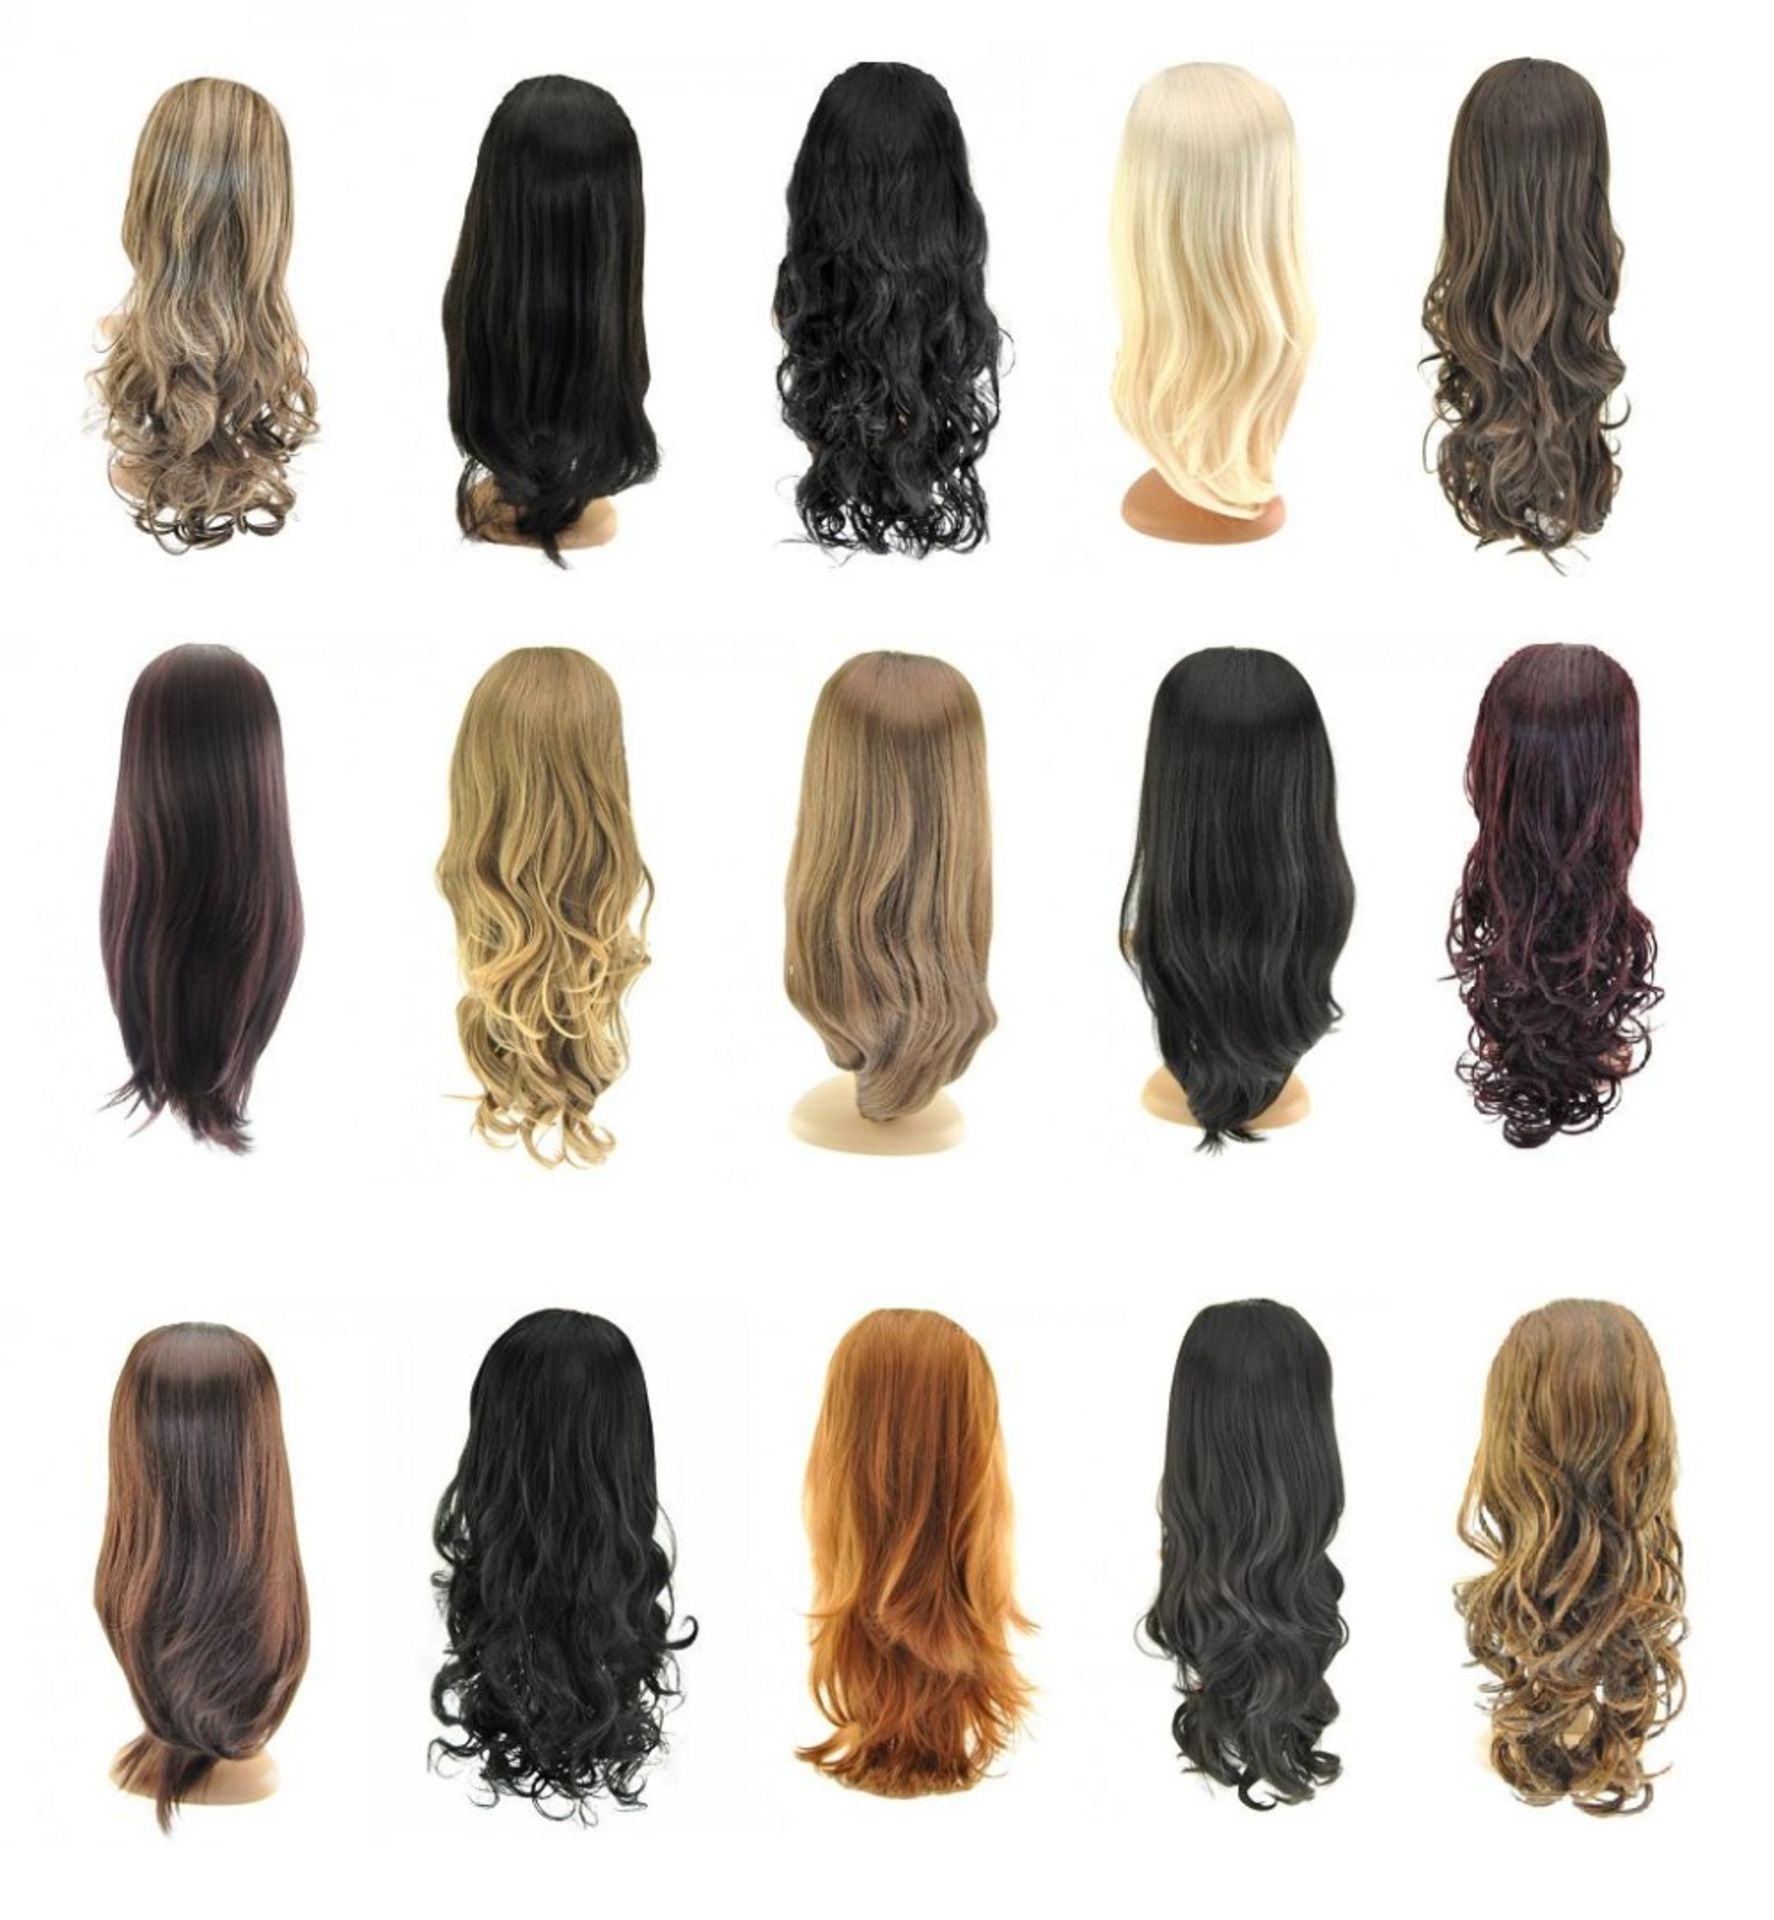 25 x stranded half wigs -4 types – NO VAT + FREE DELIVERY